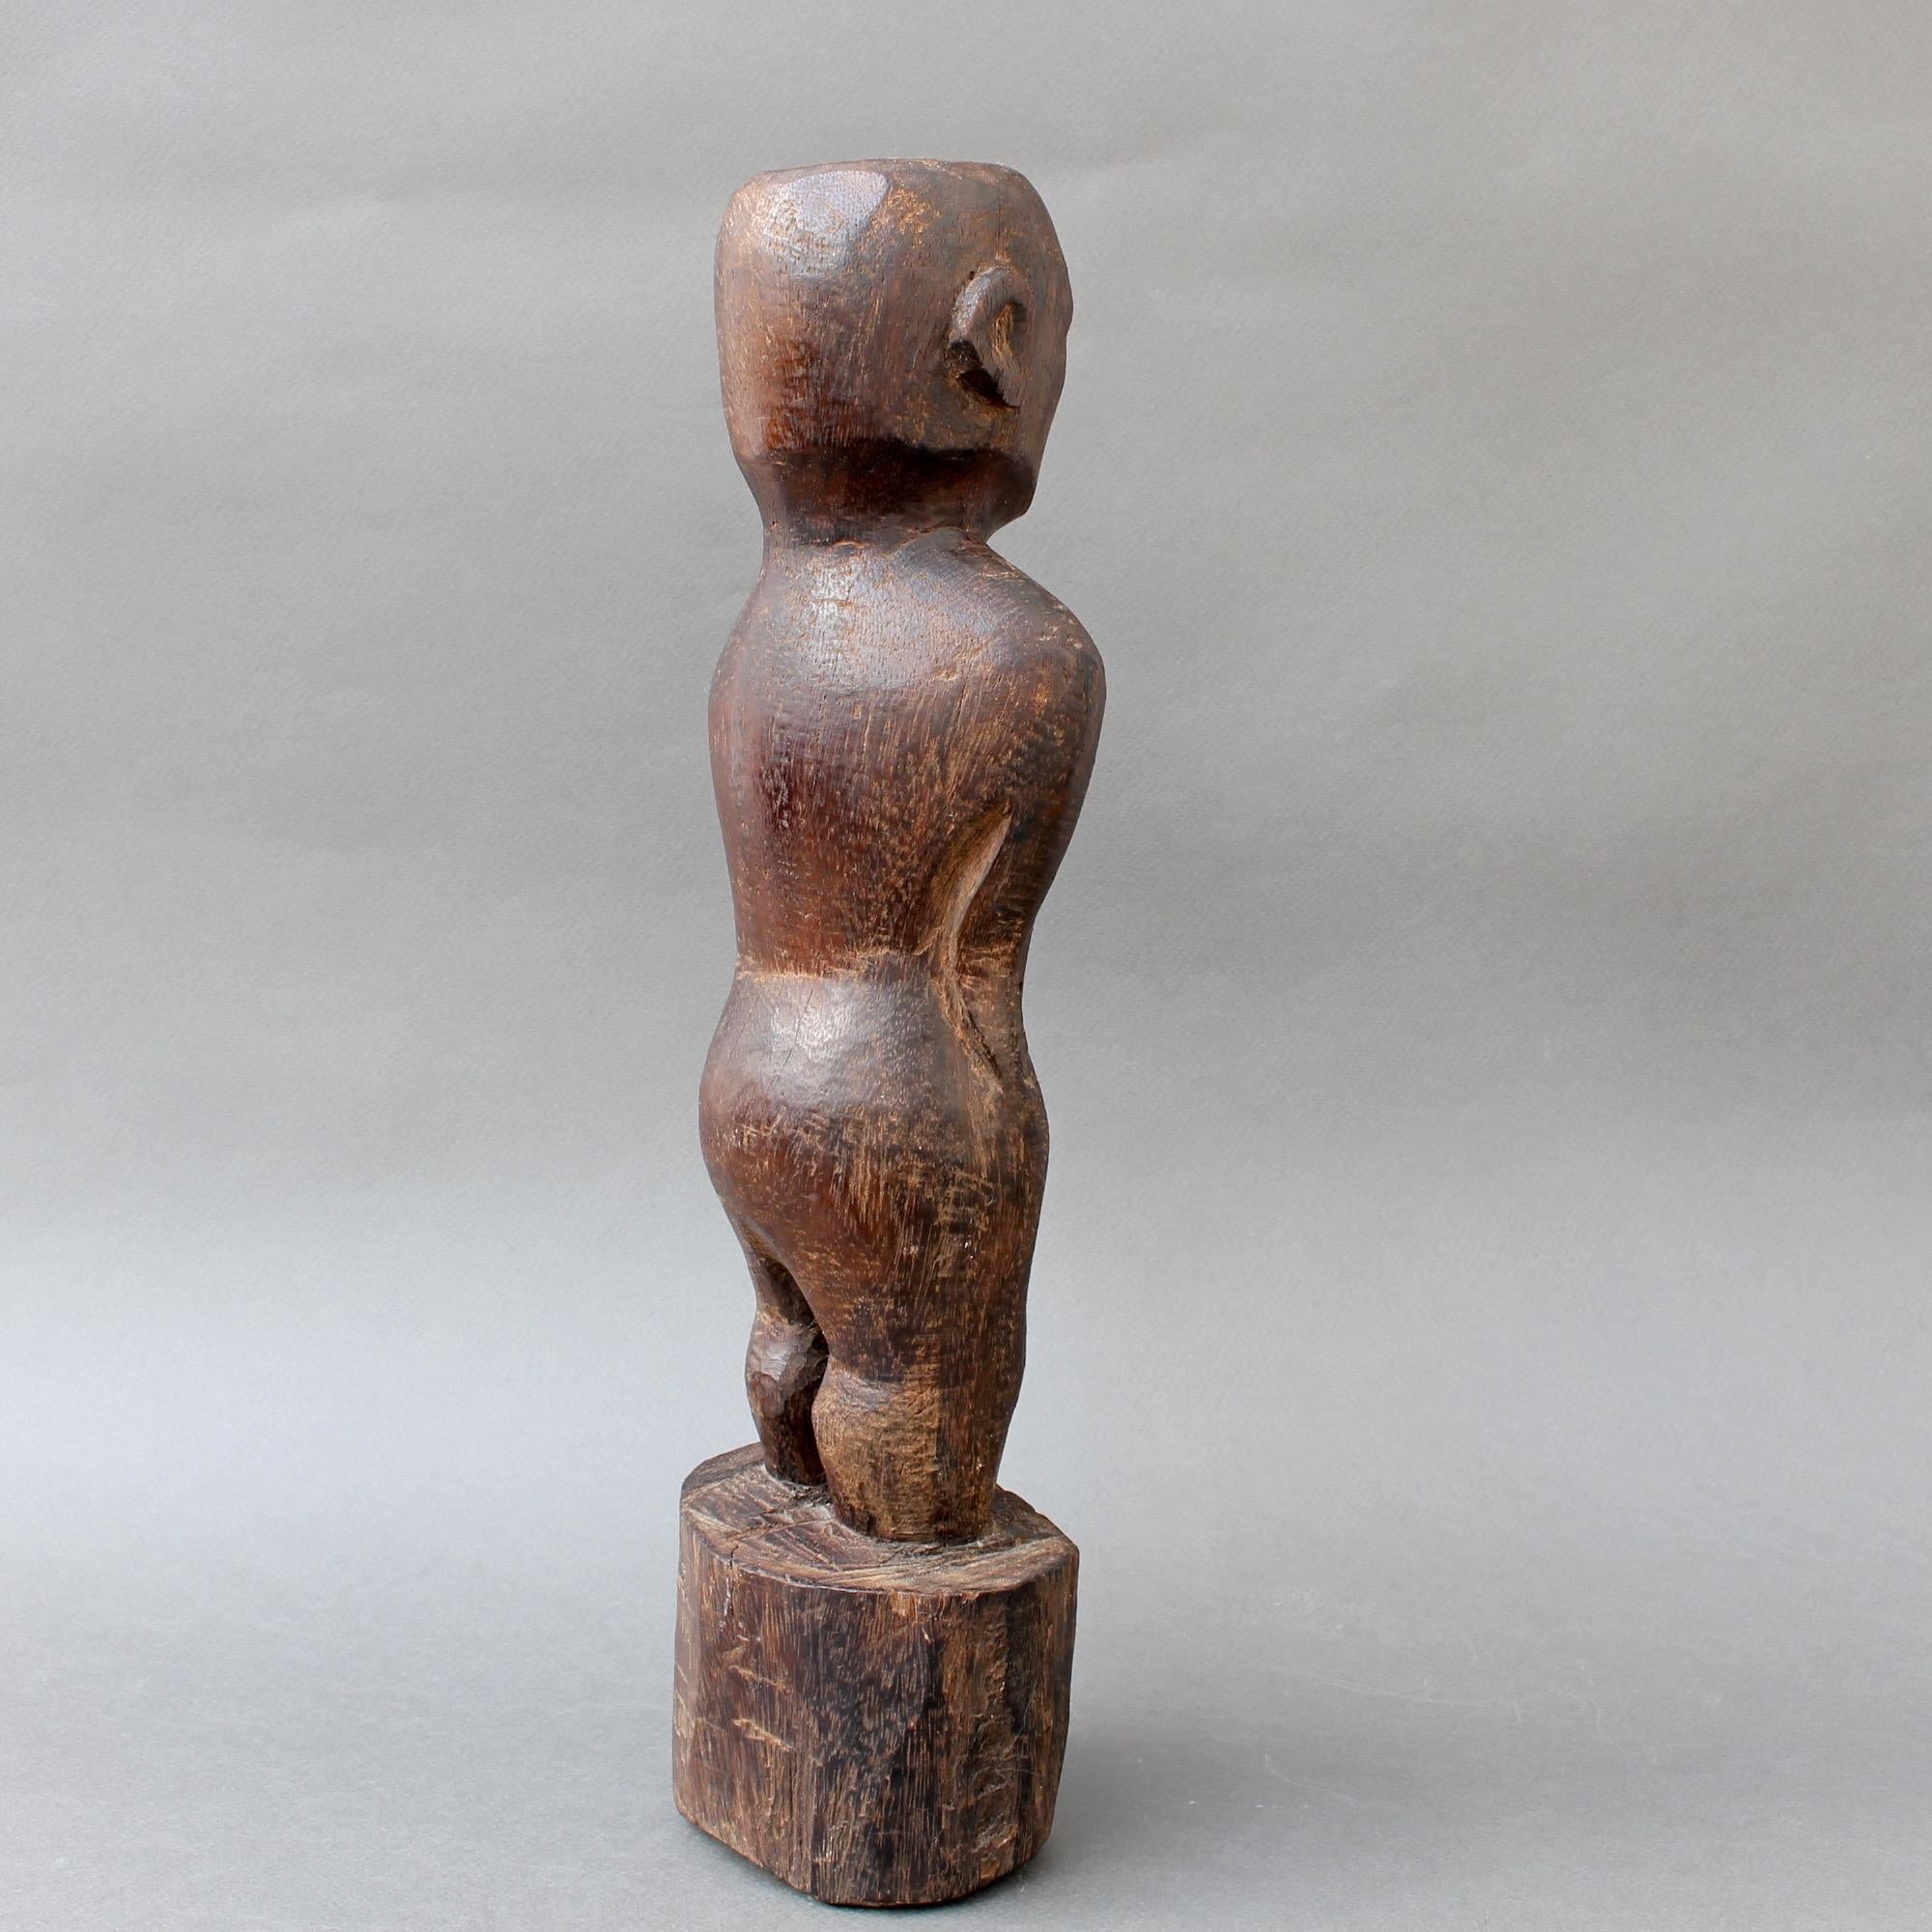 Tribal Wooden Carving or Sculpture of Standing Ancestral Figure from Timor, Indonesia